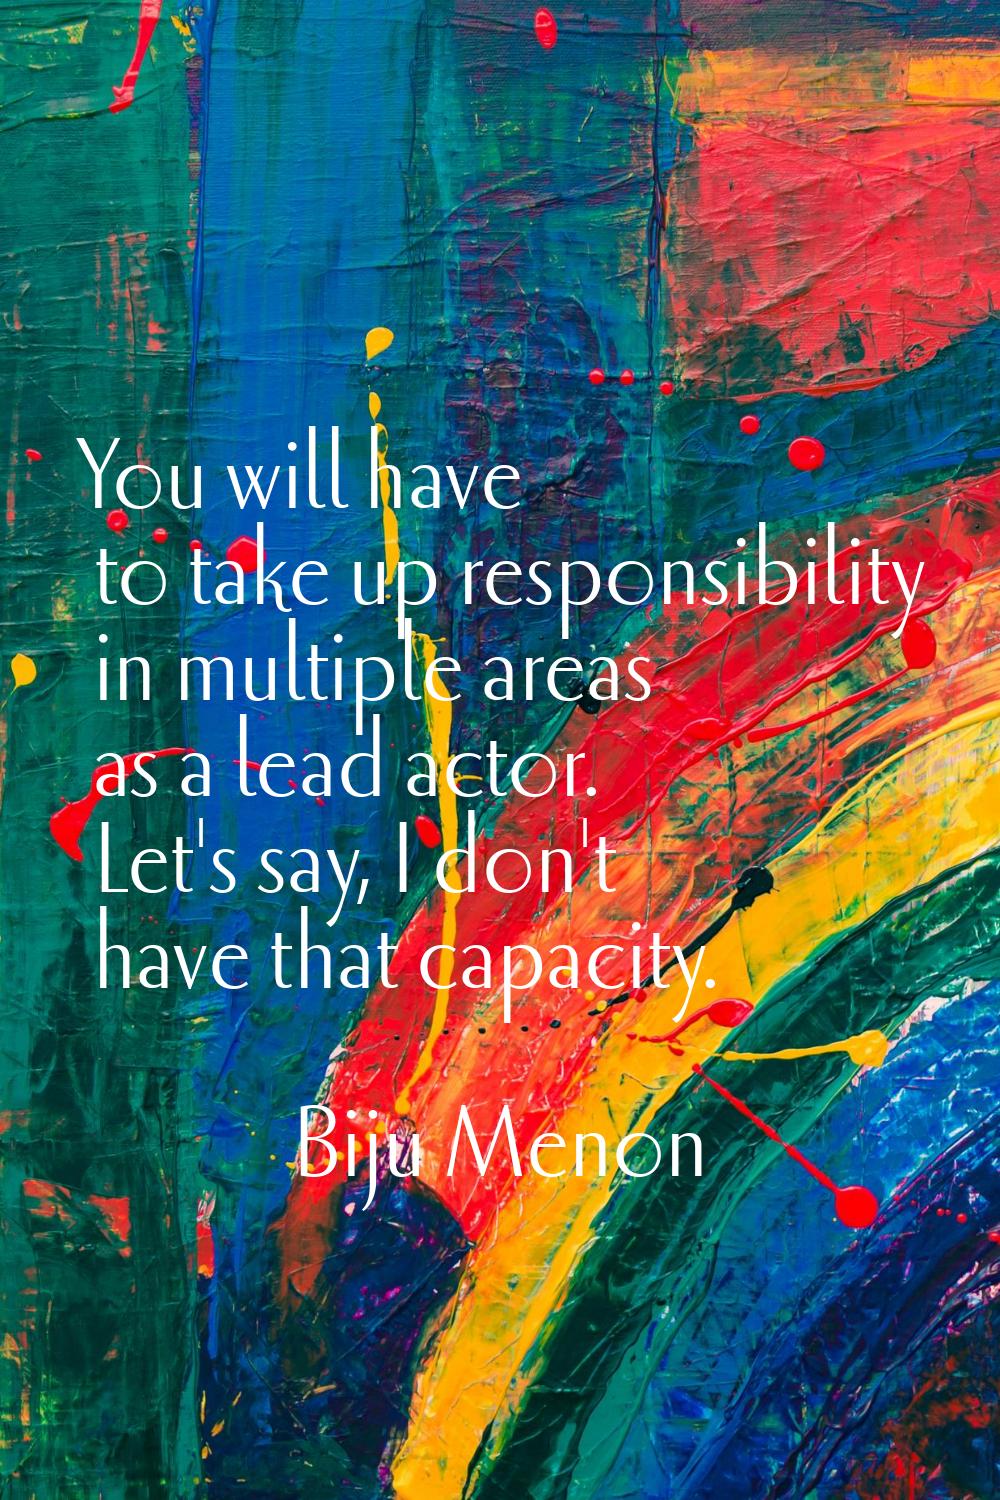 You will have to take up responsibility in multiple areas as a lead actor. Let's say, I don't have 